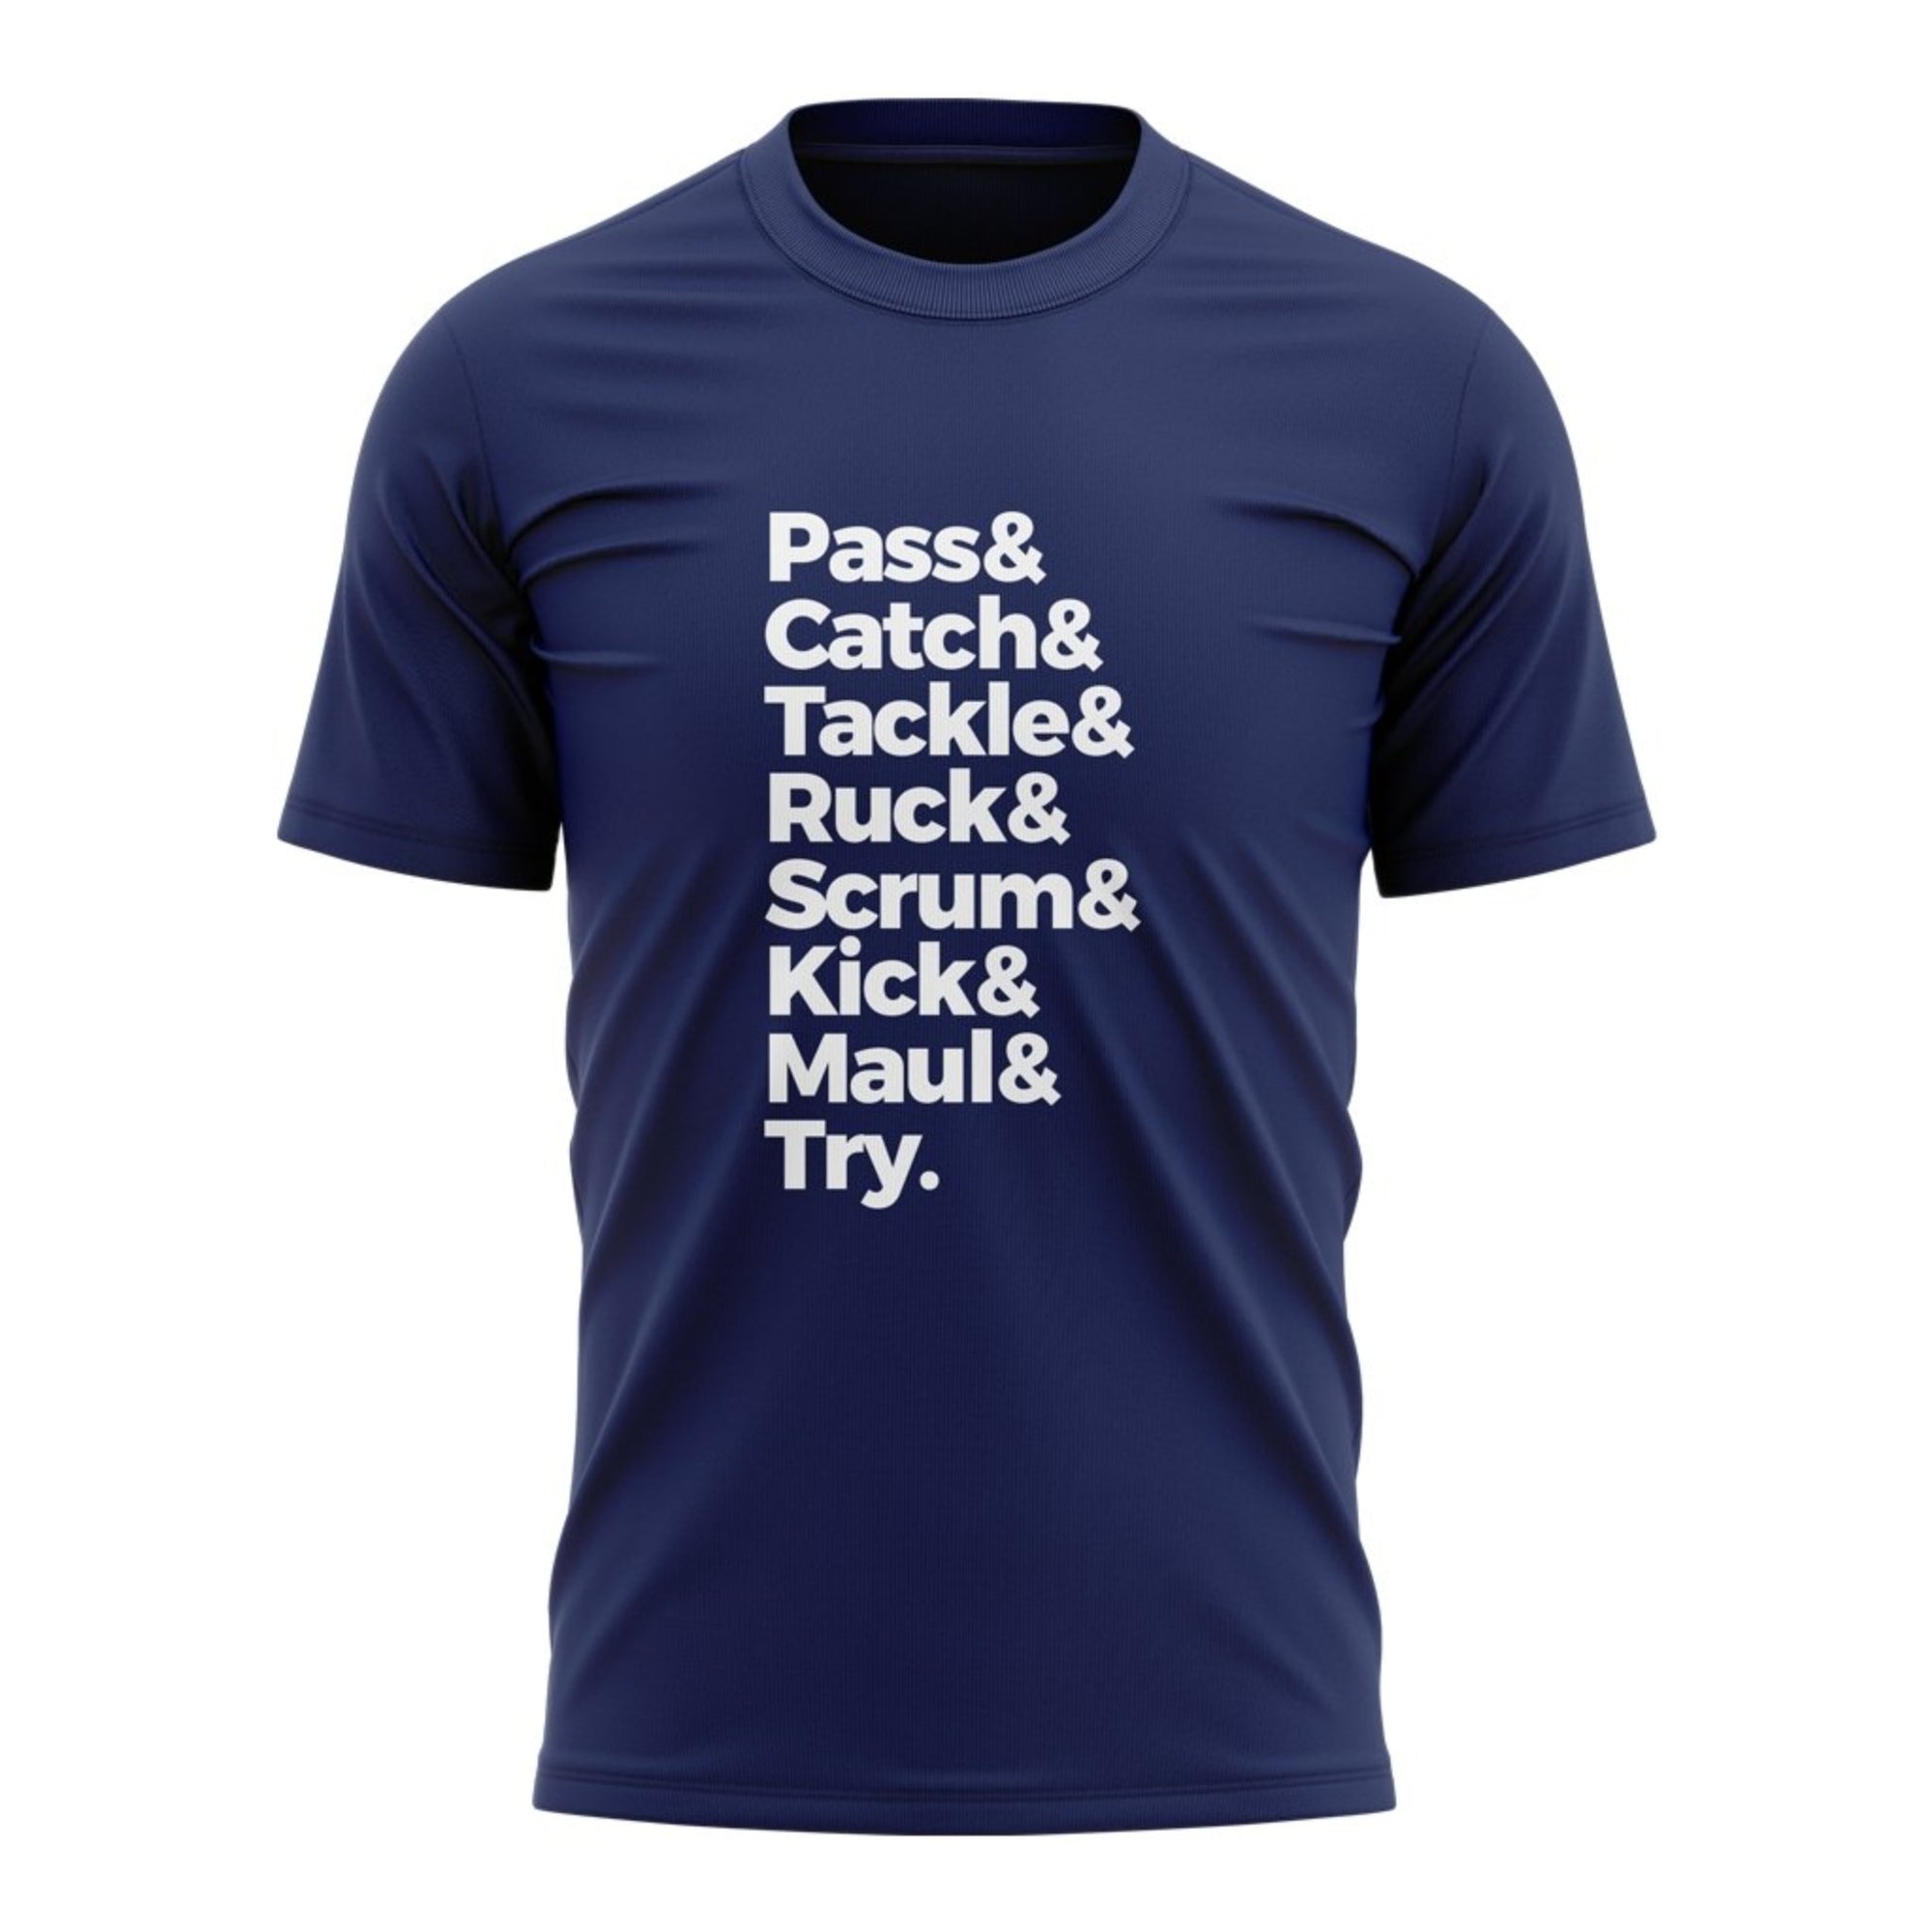 Rugby Ontario "TRY" Tee - Men's - www.therugbyshop.com www.therugbyshop.com MEN'S / NAVY / XS SANMAR TEES Rugby Ontario "TRY" Tee - Men's